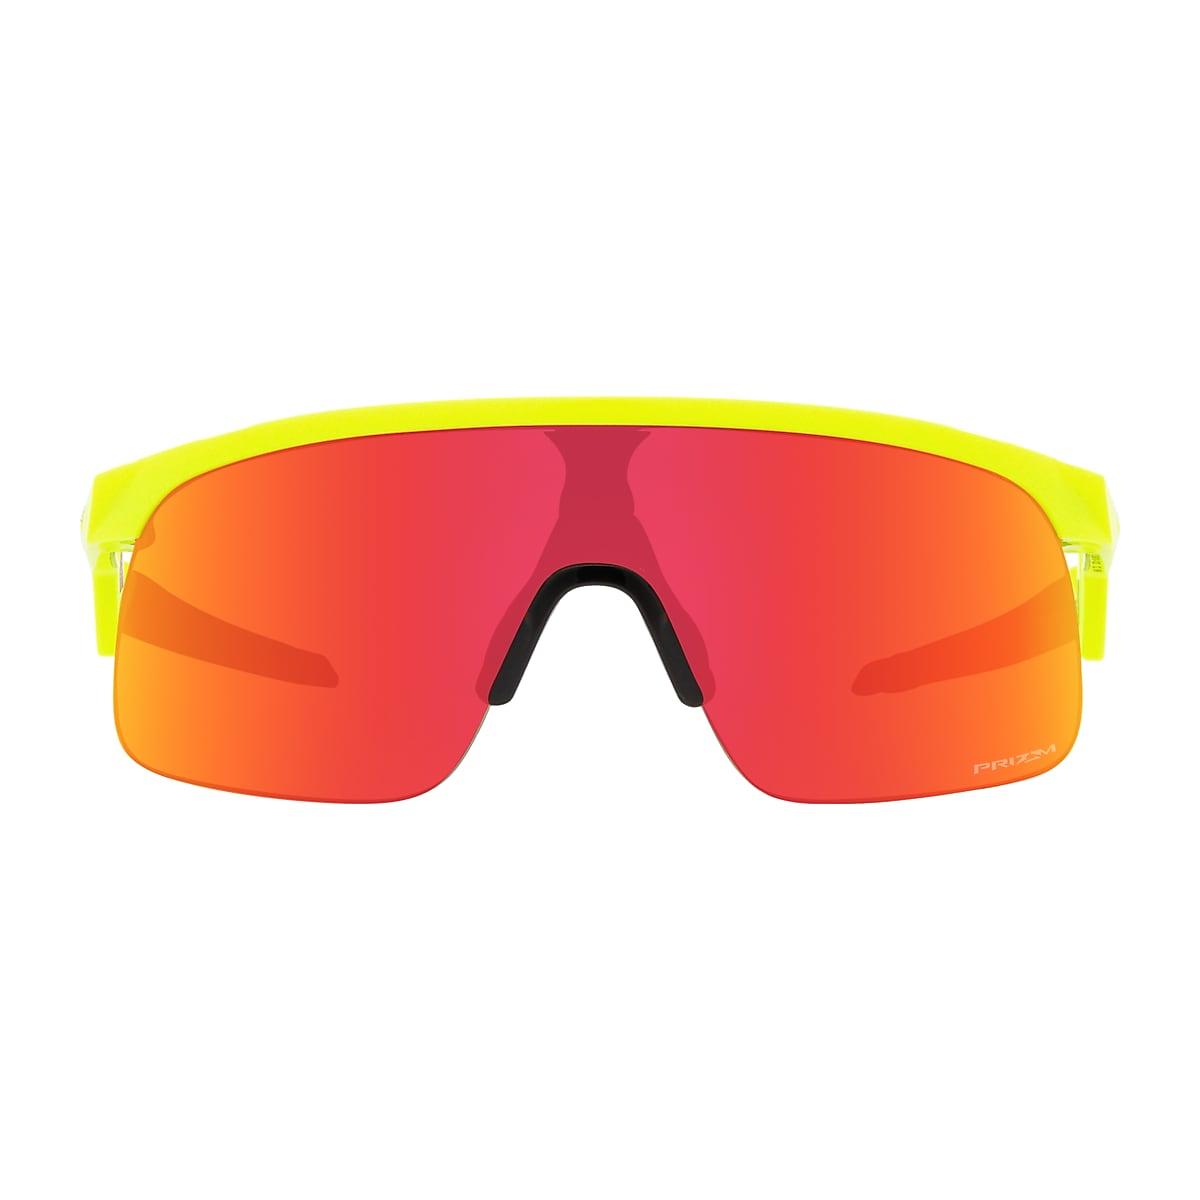  Tintart Performance Replacement Lenses Compatible with Oakley  Juliet - HD Trail Ruby : ביגוד, נעליים ותכשיטים